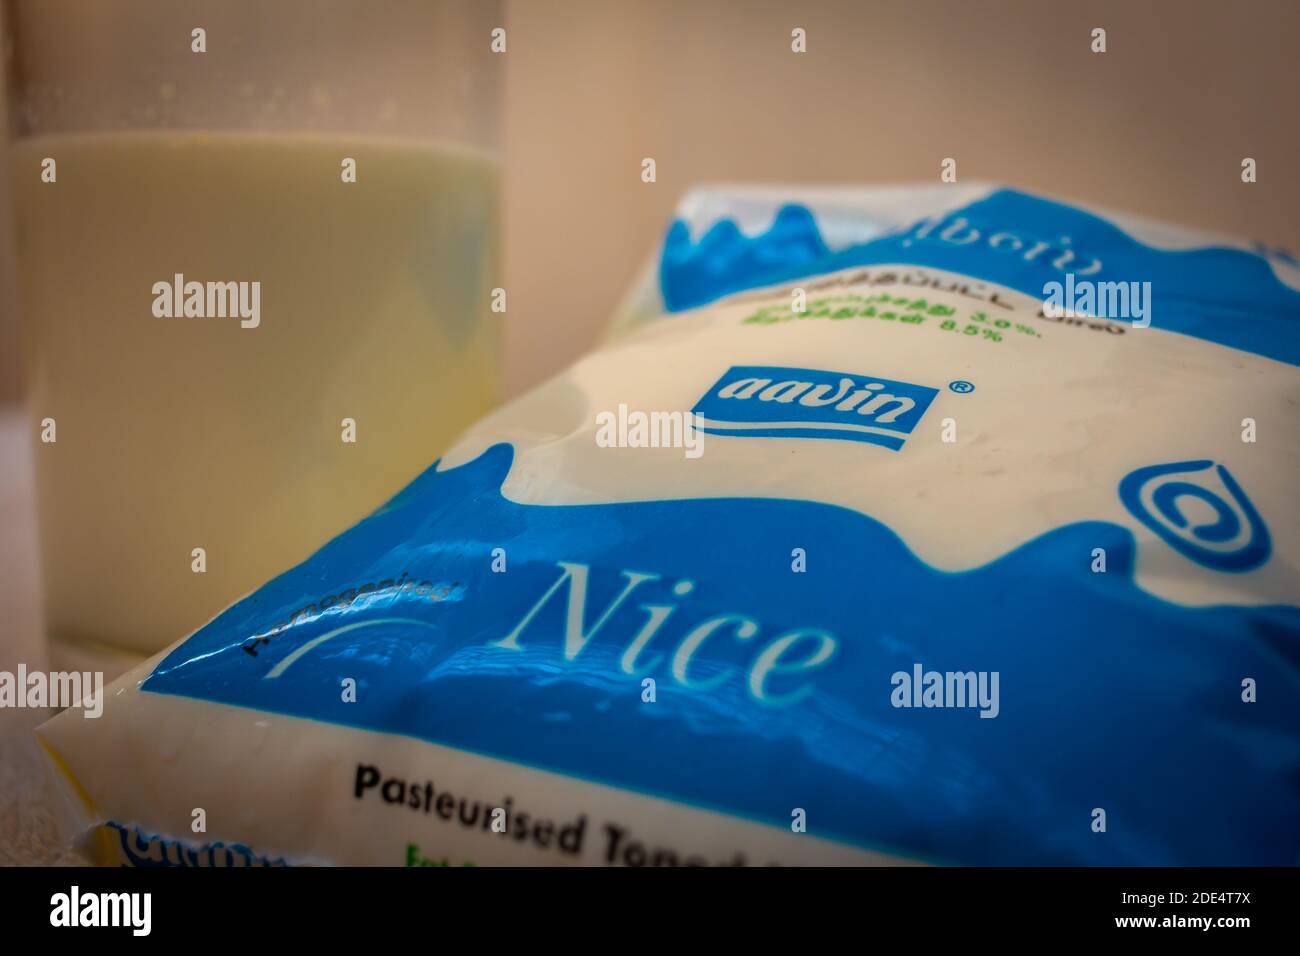 Download Chennai Tamil Nadu India Nov 28 2020 Aavin Milk Sachet Which Is Common Brand Of Milk Suppliers In Tamil Nadu India Stock Photo Alamy